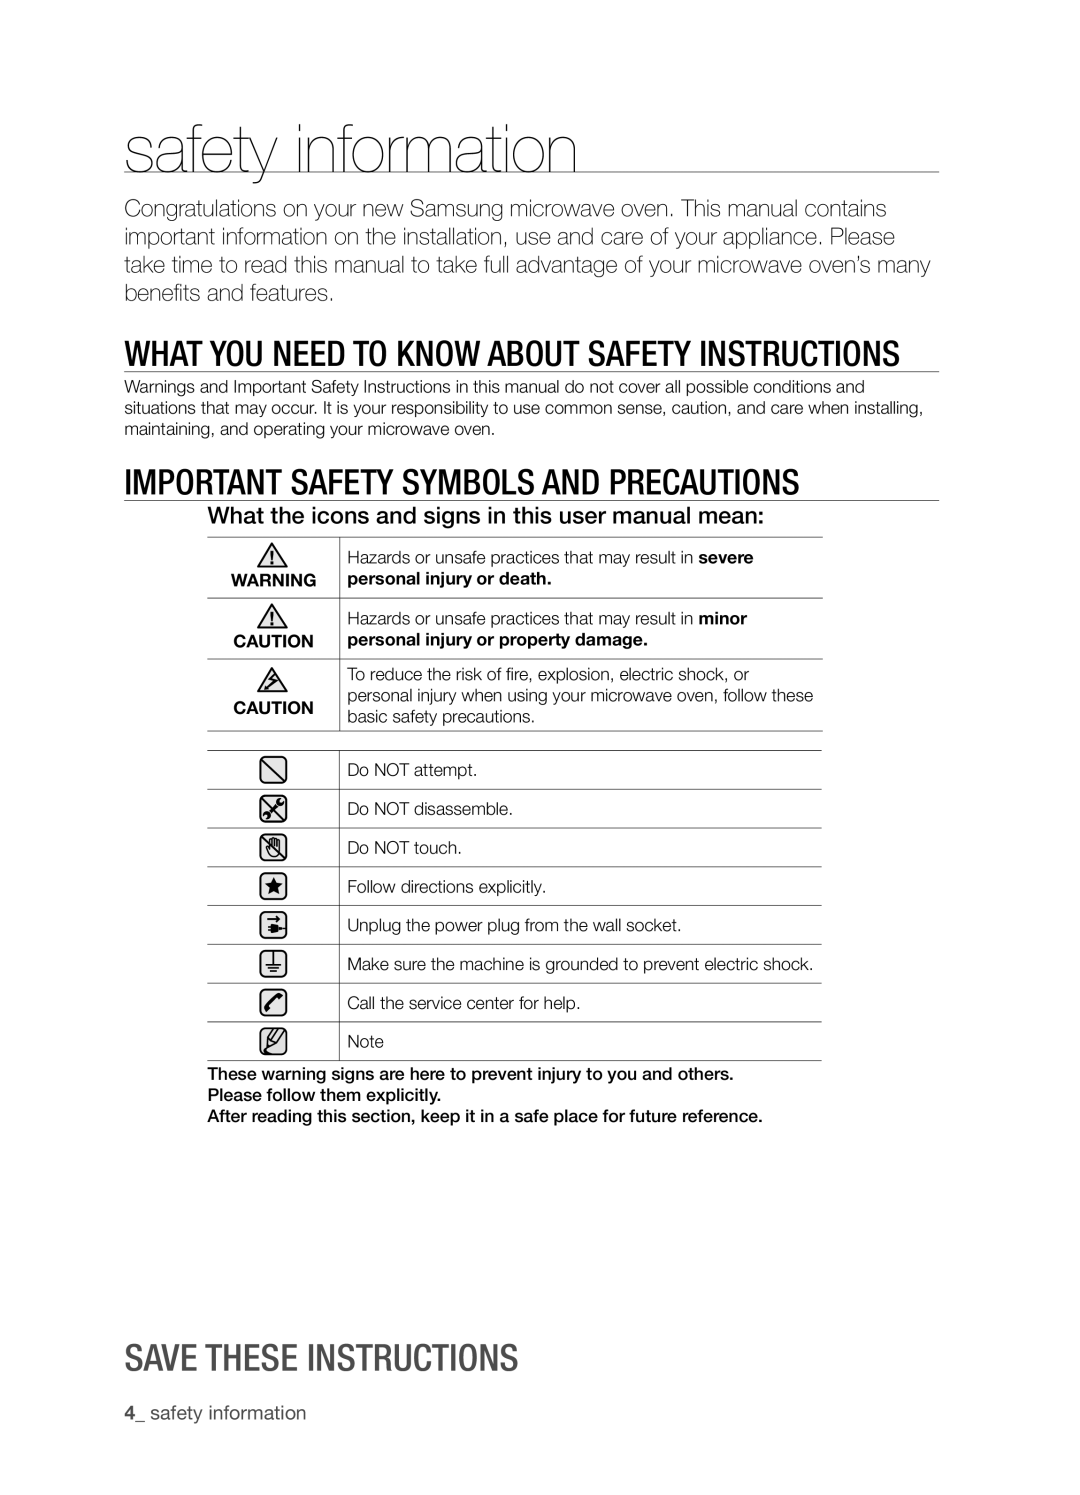 Samsung SMH8165STG user manual What you need to know about safety instructions, IMPORTANT safety symbols and precautions 